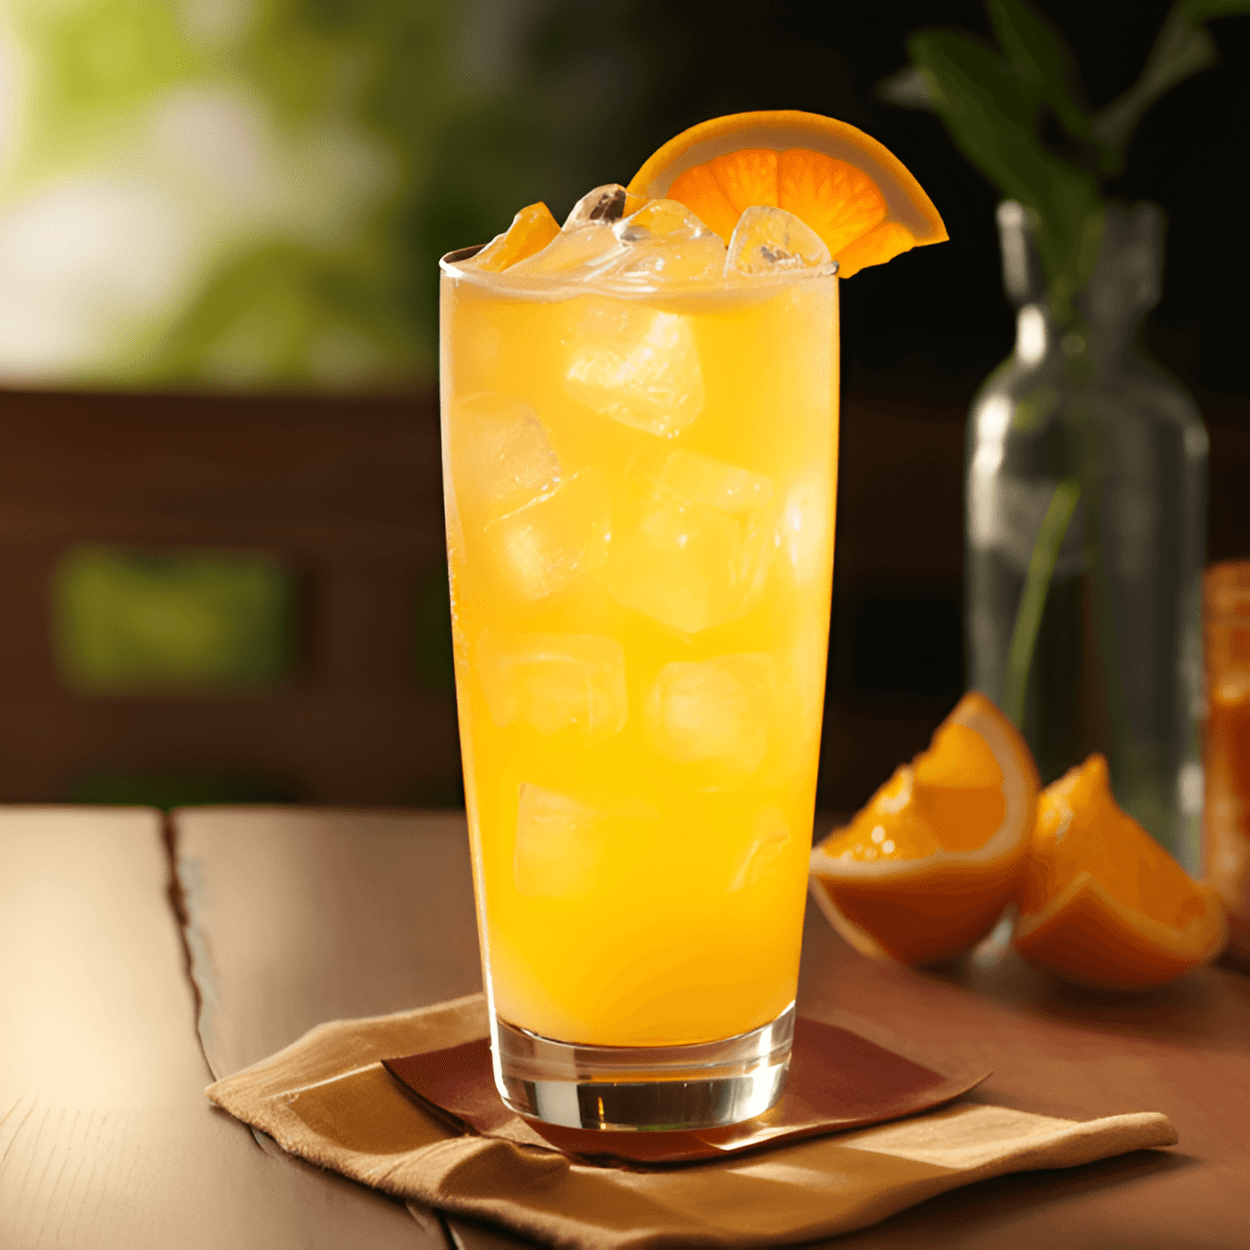 The Fuzzy Navel is a sweet, fruity, and refreshing cocktail. It has a bright citrus taste from the orange juice, combined with the smooth and sweet flavor of peach schnapps. The drink is light and easy to sip, making it perfect for warm weather or a relaxing evening.